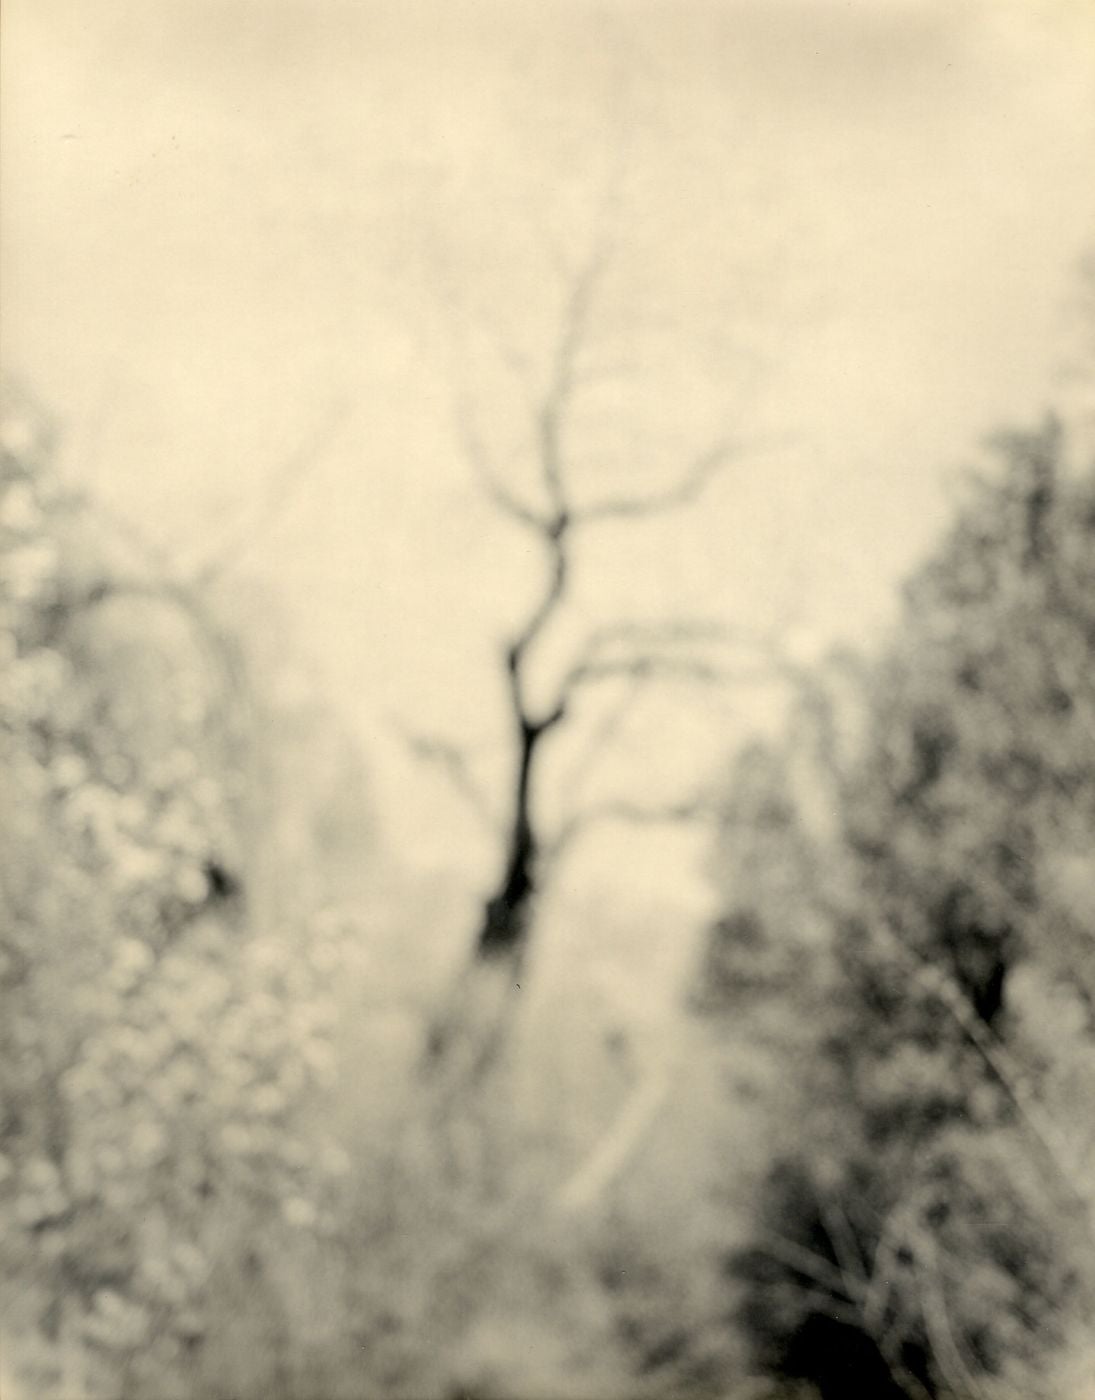 Robert Stivers: Sestina, Limited Edition (with Toned Silver Print, "The Clearing" Variant)